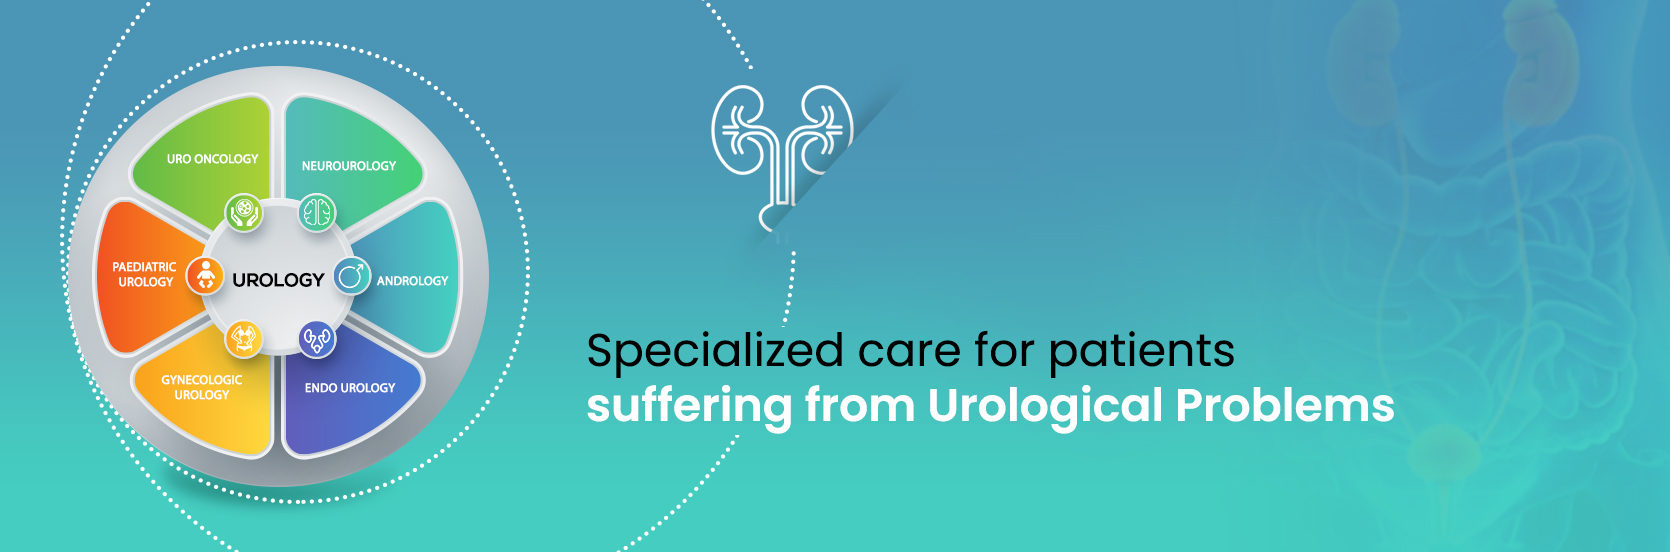 specialised care for patients